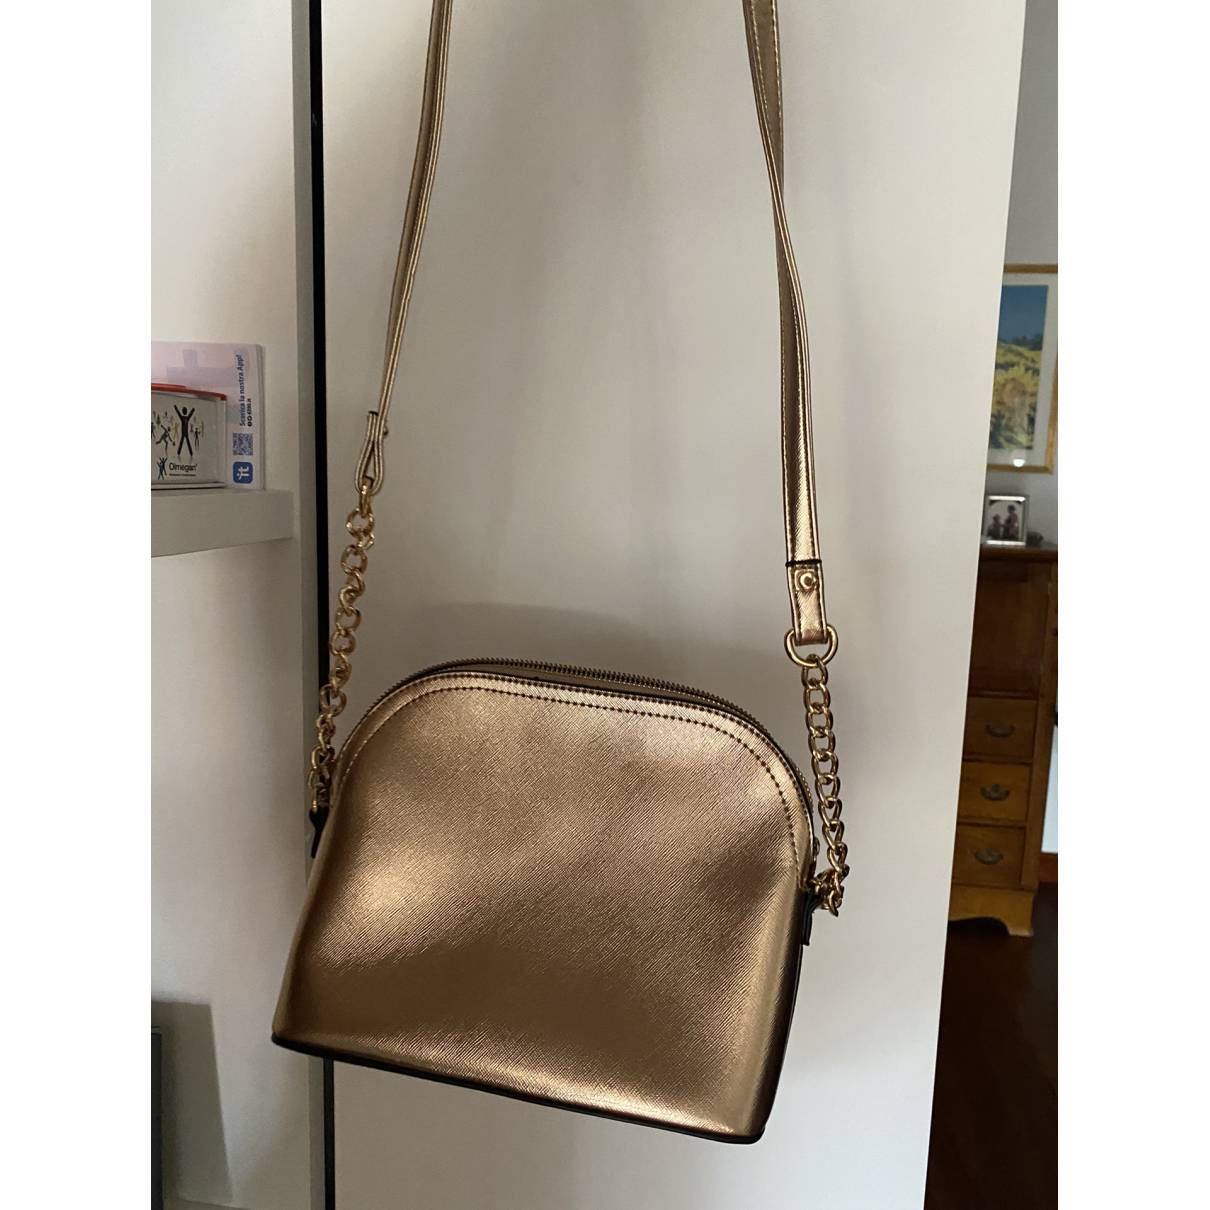 Steve Madden - Authenticated Handbag - Leather Gold Plain for Women, Very Good Condition